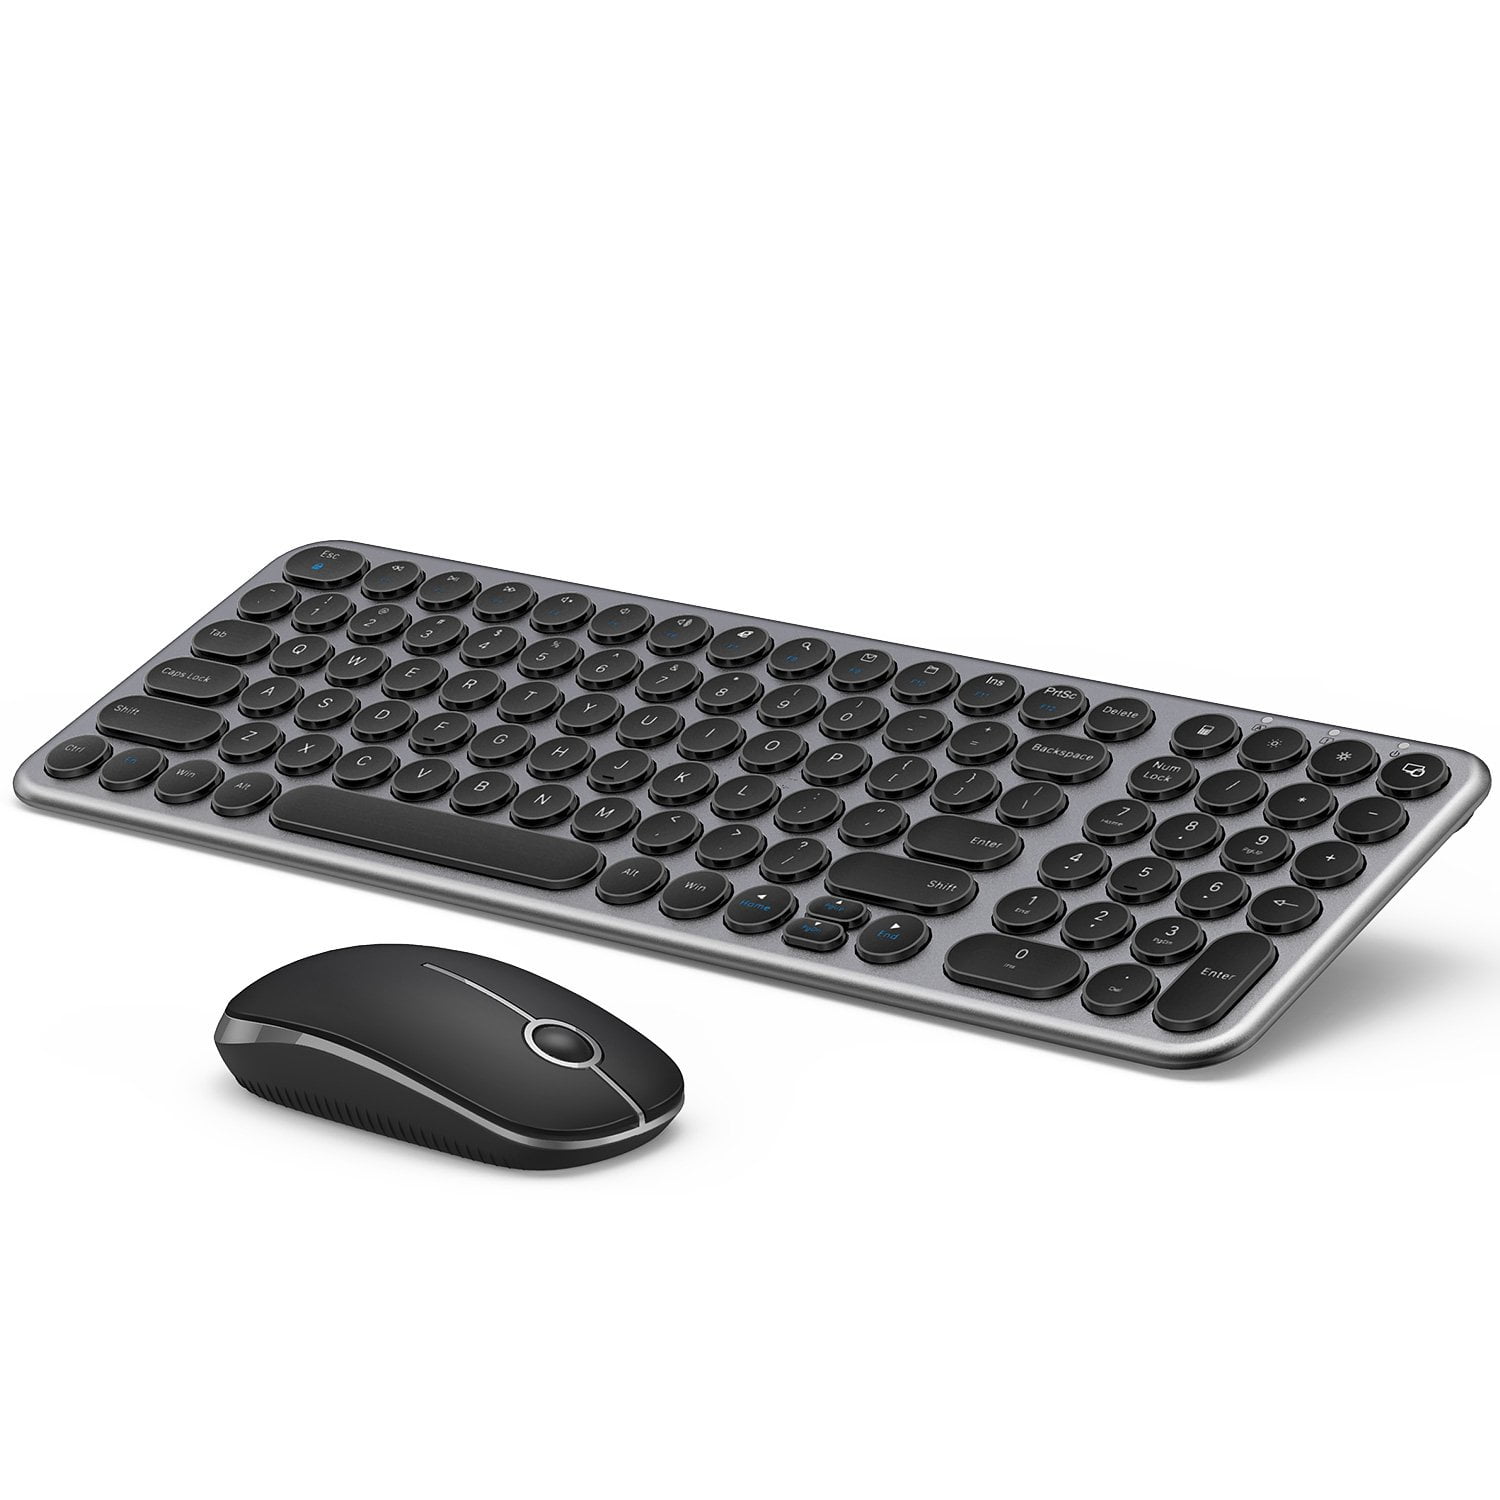 Black Jelly Comb Ultra Thin 2.4G Wireless Keyboard and Mouse Full Size with 12 Multi-Media Keys for Windows Computer PC Laptop Desktop Wireless Keyboard Mouse